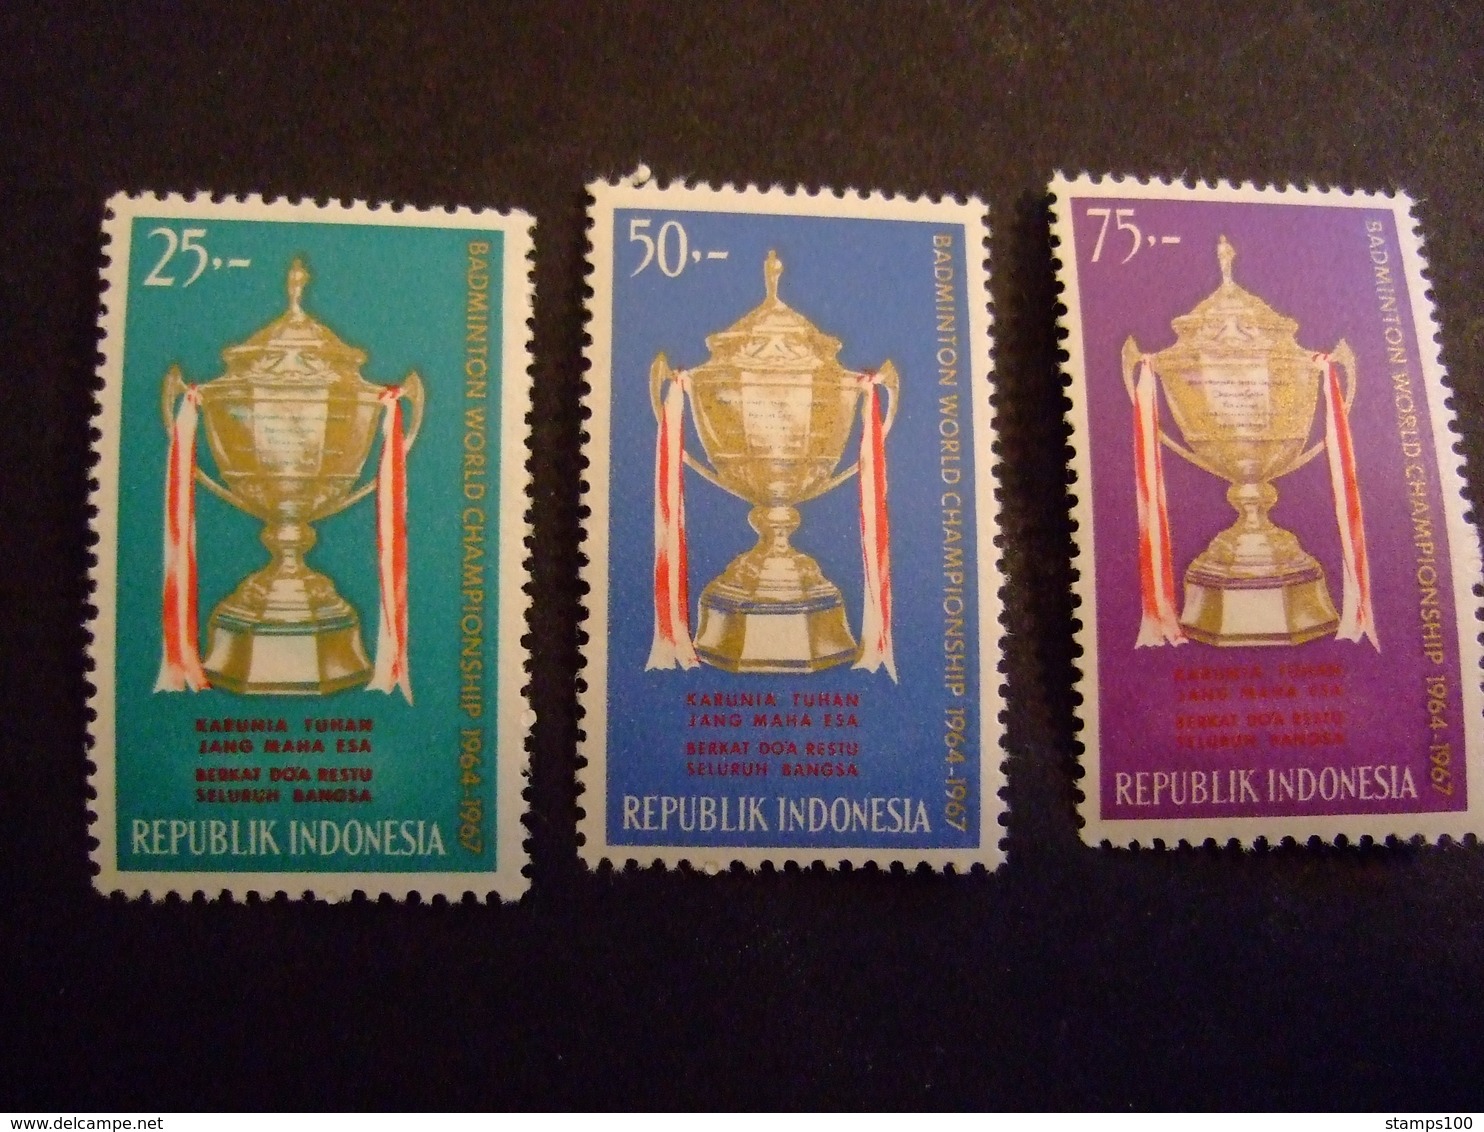 INDONESIA 1964 WINNER OF THE BADMINTON THOMAS CUP. MNH**. (VN-IND-9) - Badminton